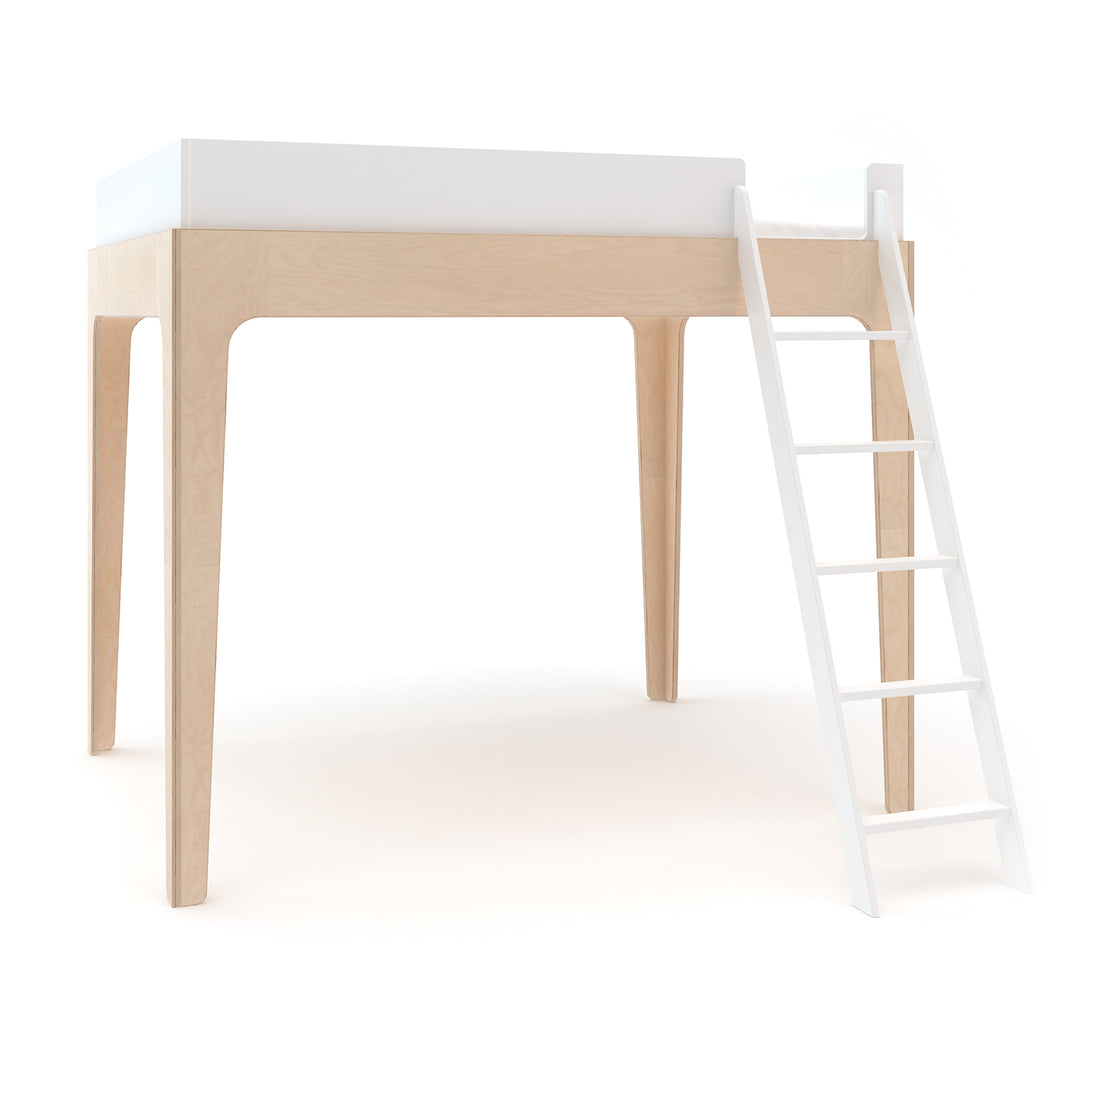 Oeuf Perch Bunk Bed Birch